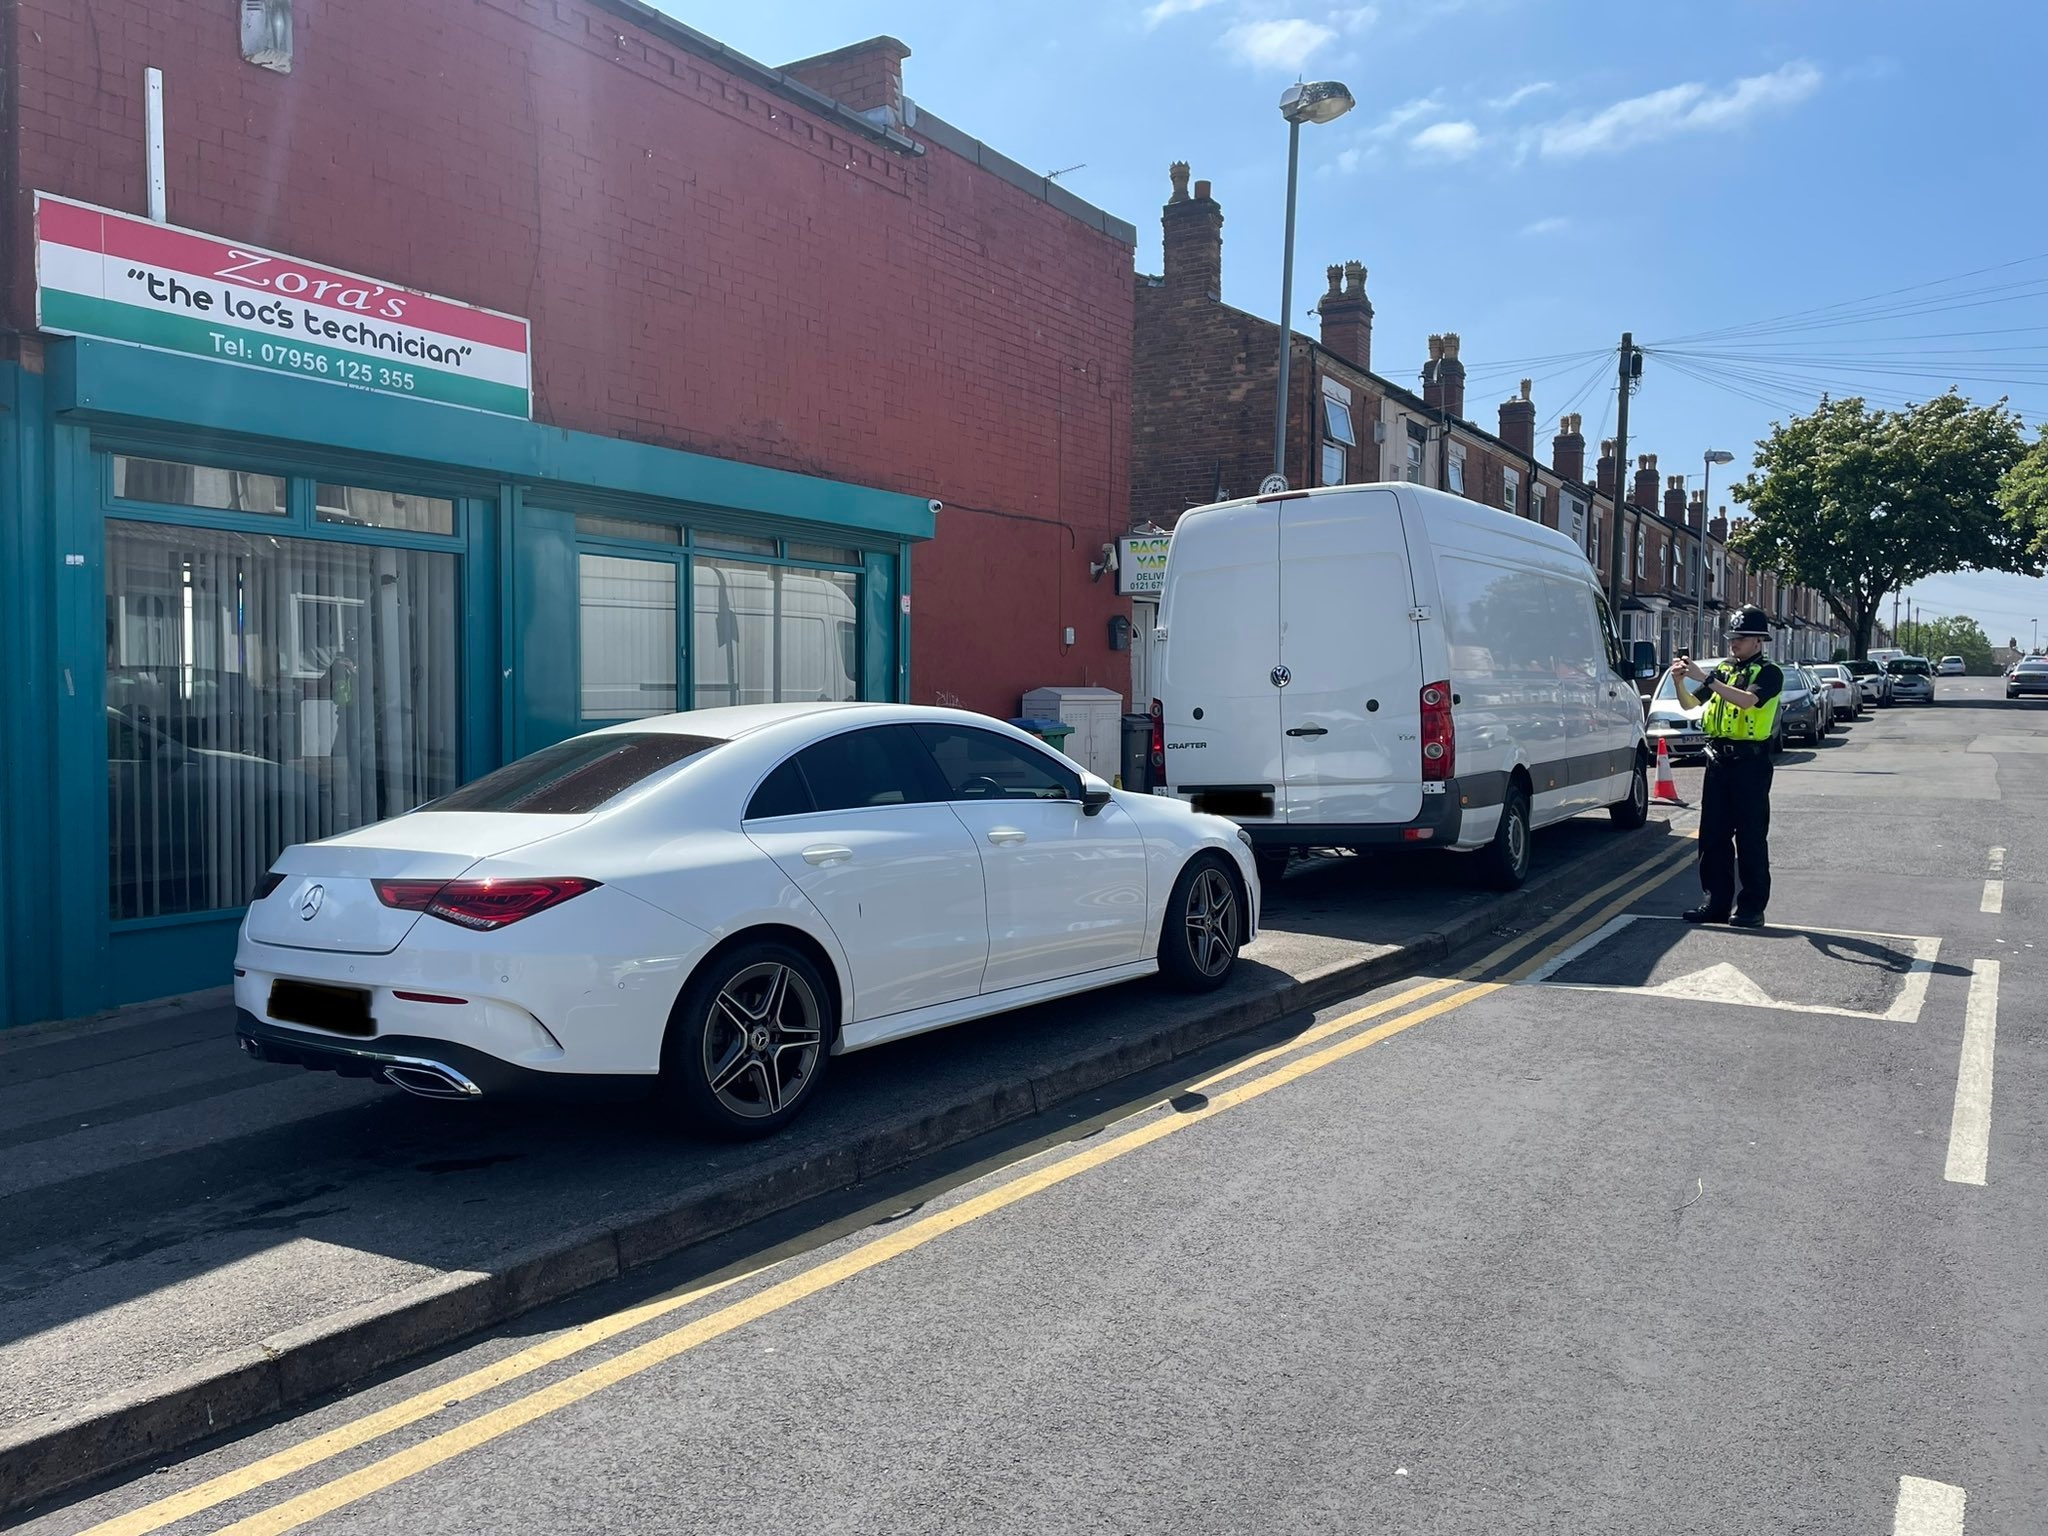 Technically they're not parked on a double yellow, but this is not the right way to do things. Credit: Twitter/@SohoRoadWMP